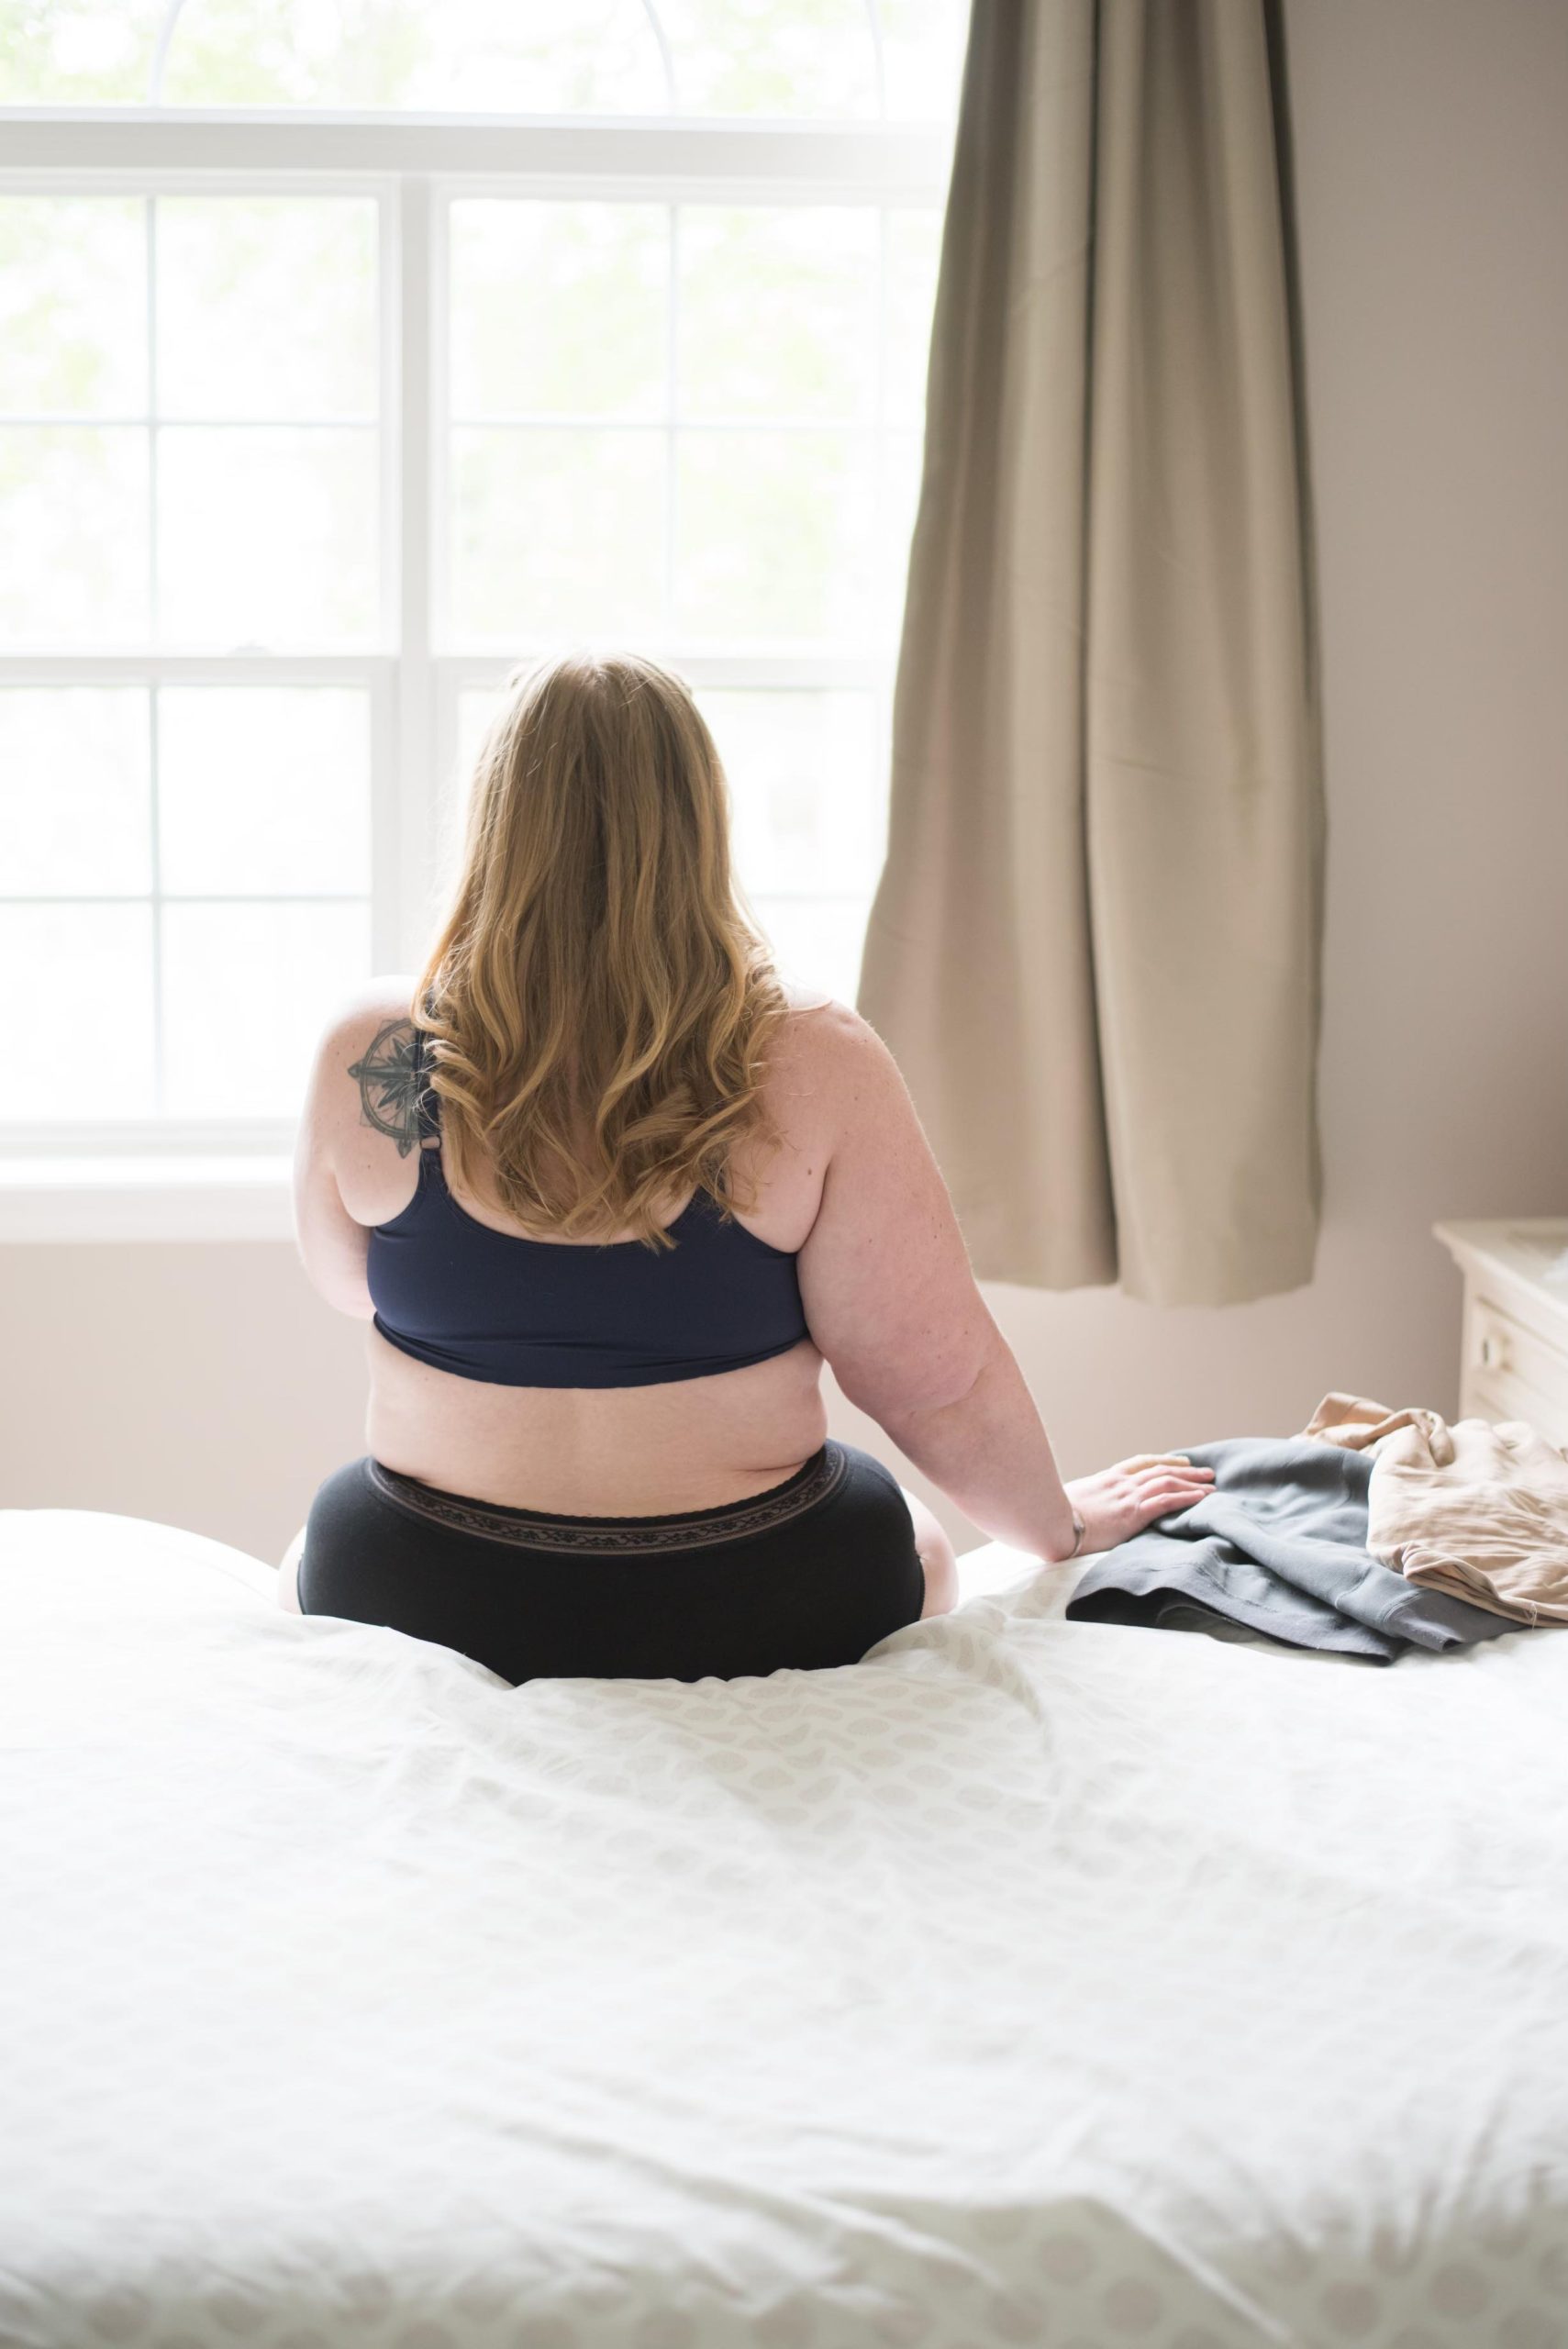 Why do so many Women give up? – The Weight of Lipedema